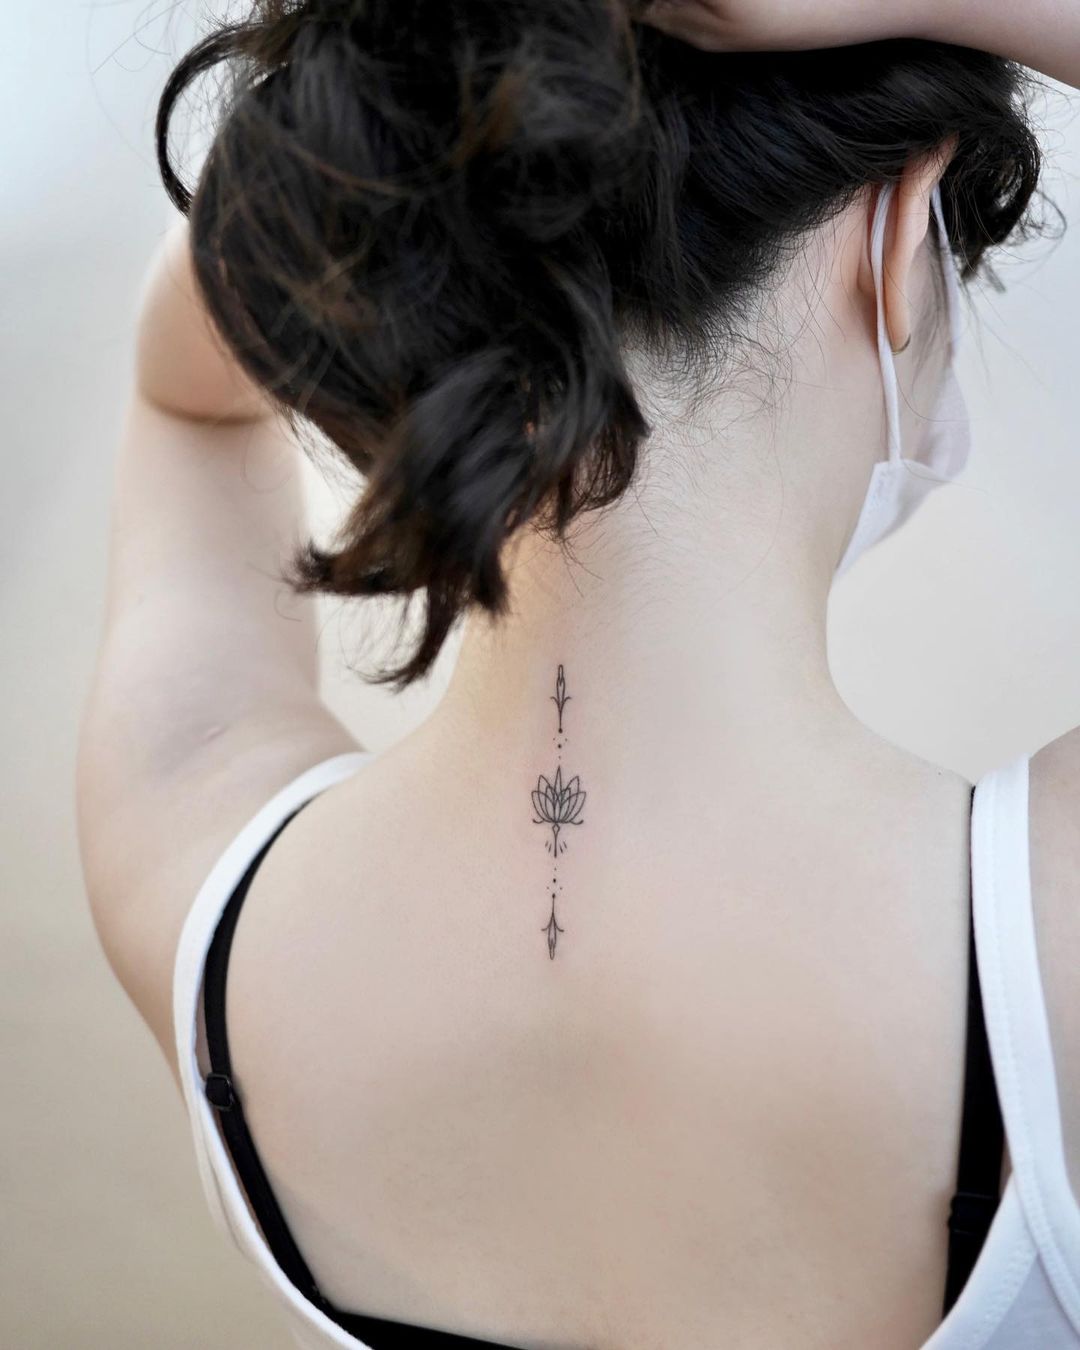 25 Anchor Tattoos For Every Preference